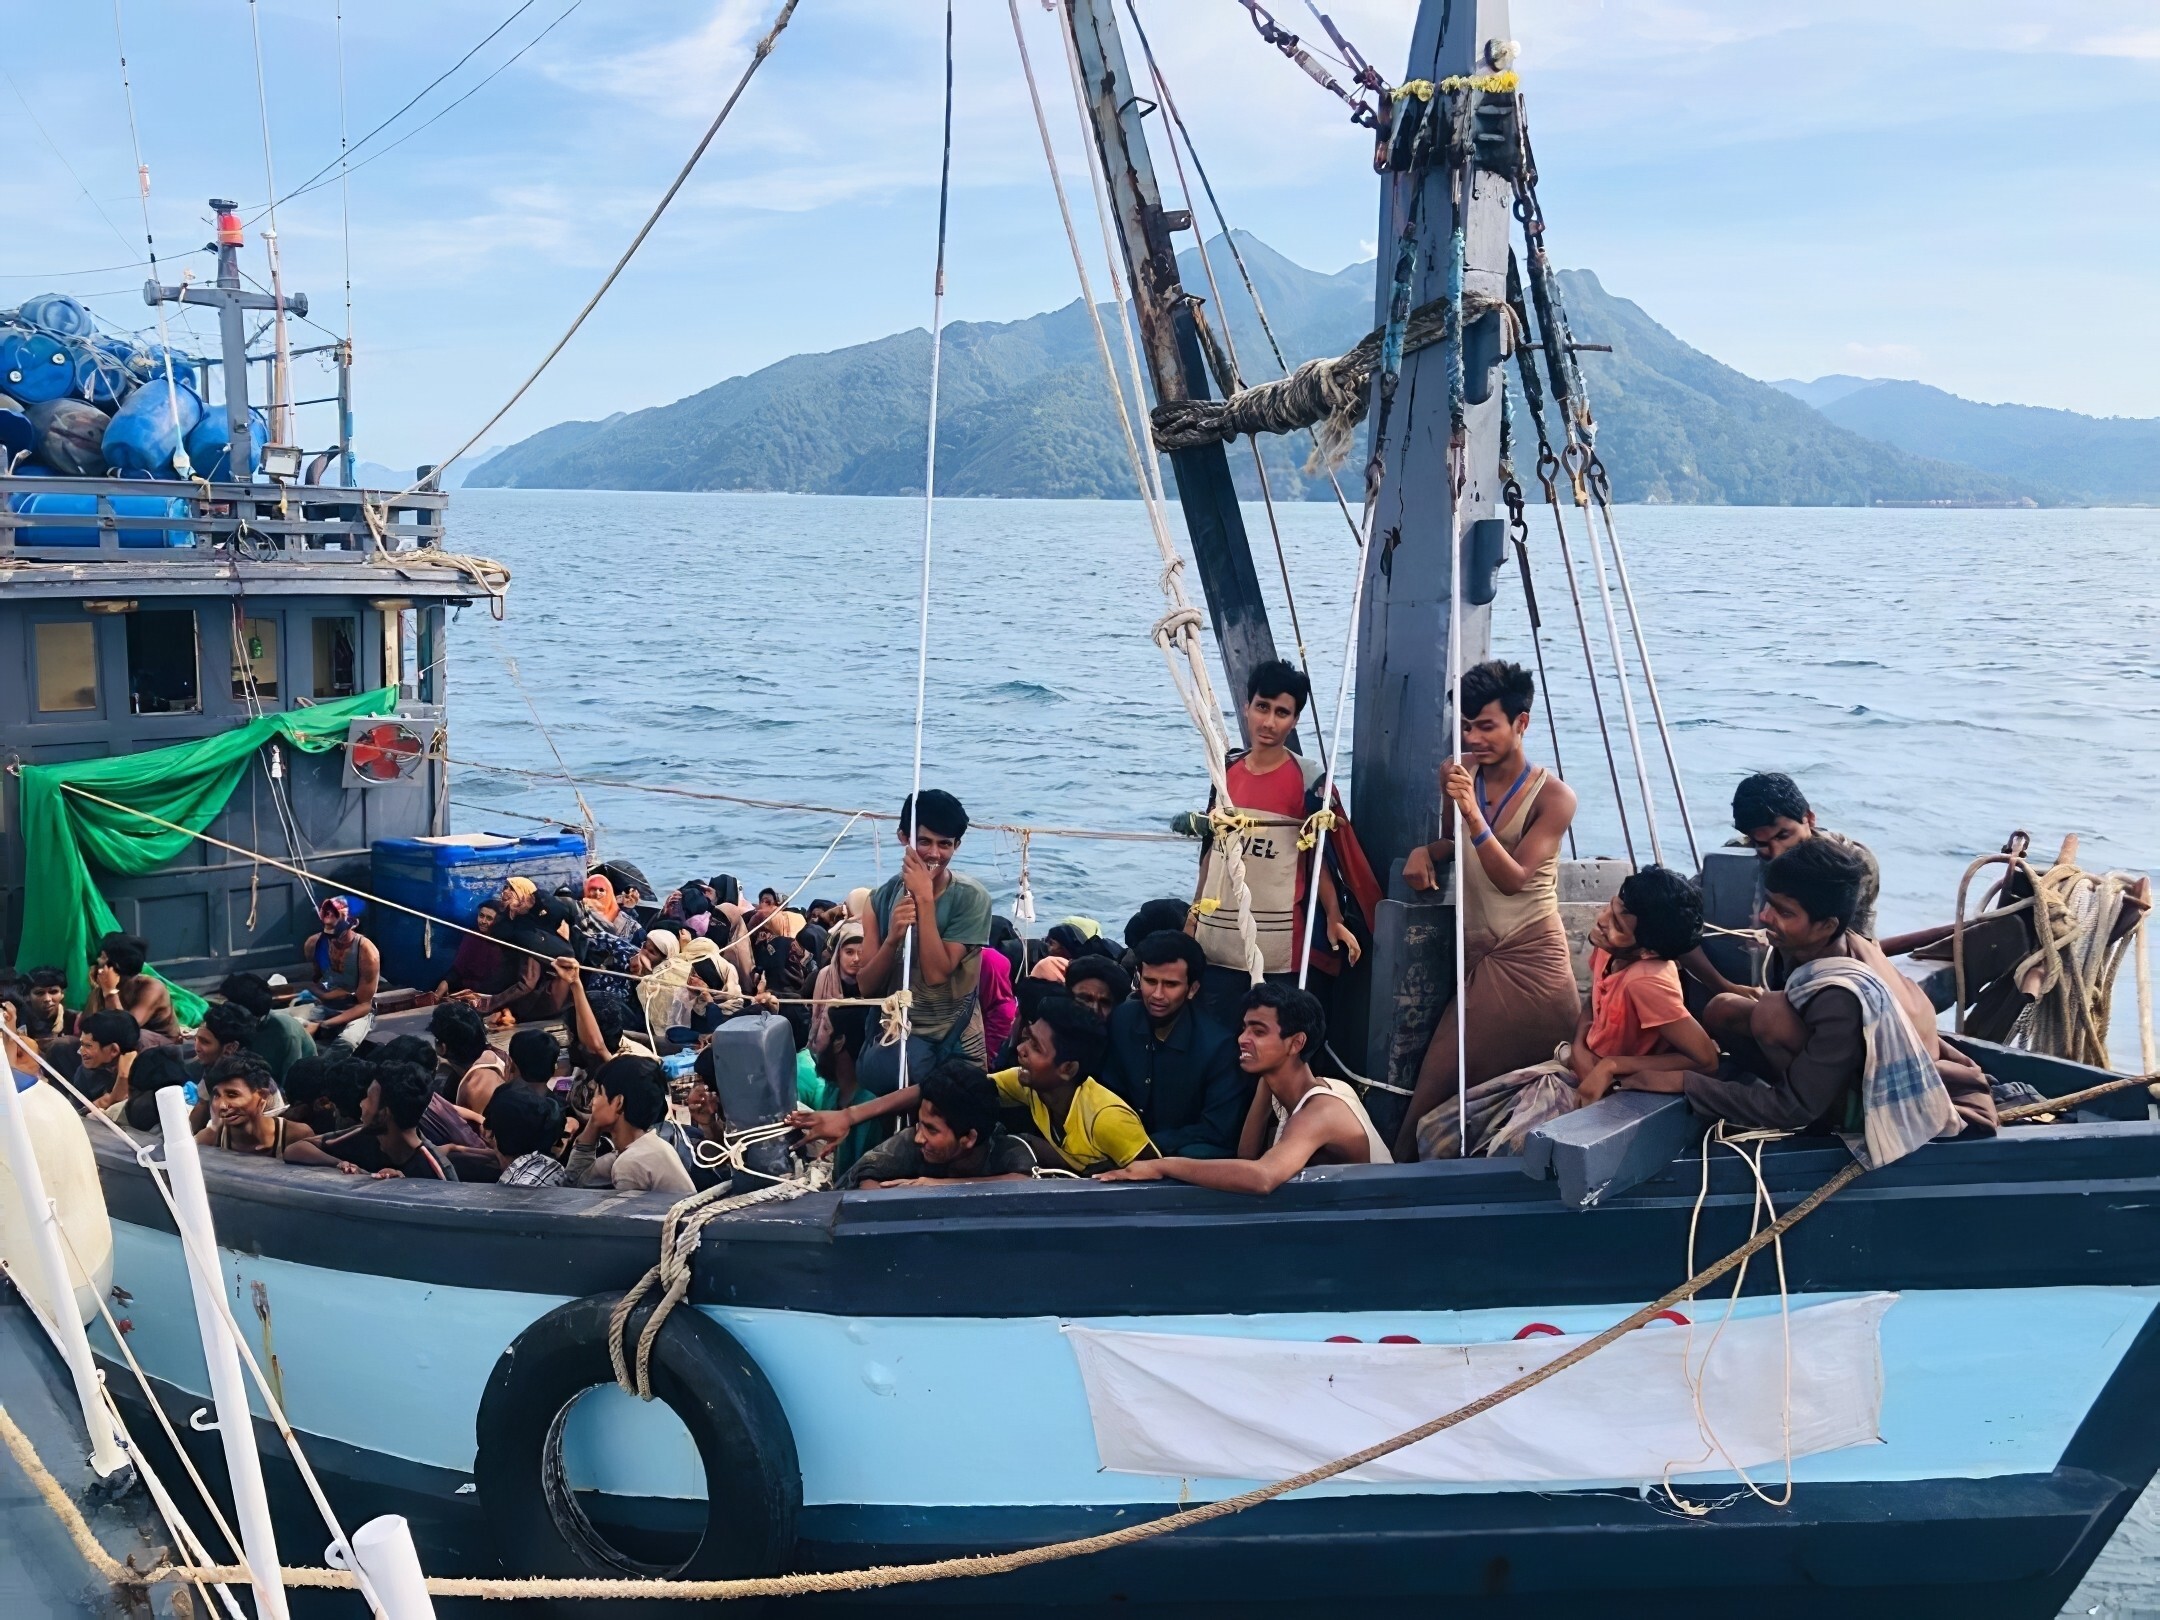 A boat carrying suspected Rohingya migrants was detained in Malaysian territorial waters off the island of Langkawi on April 5. Photo: Malaysian Maritime Enforcement Agency/AP